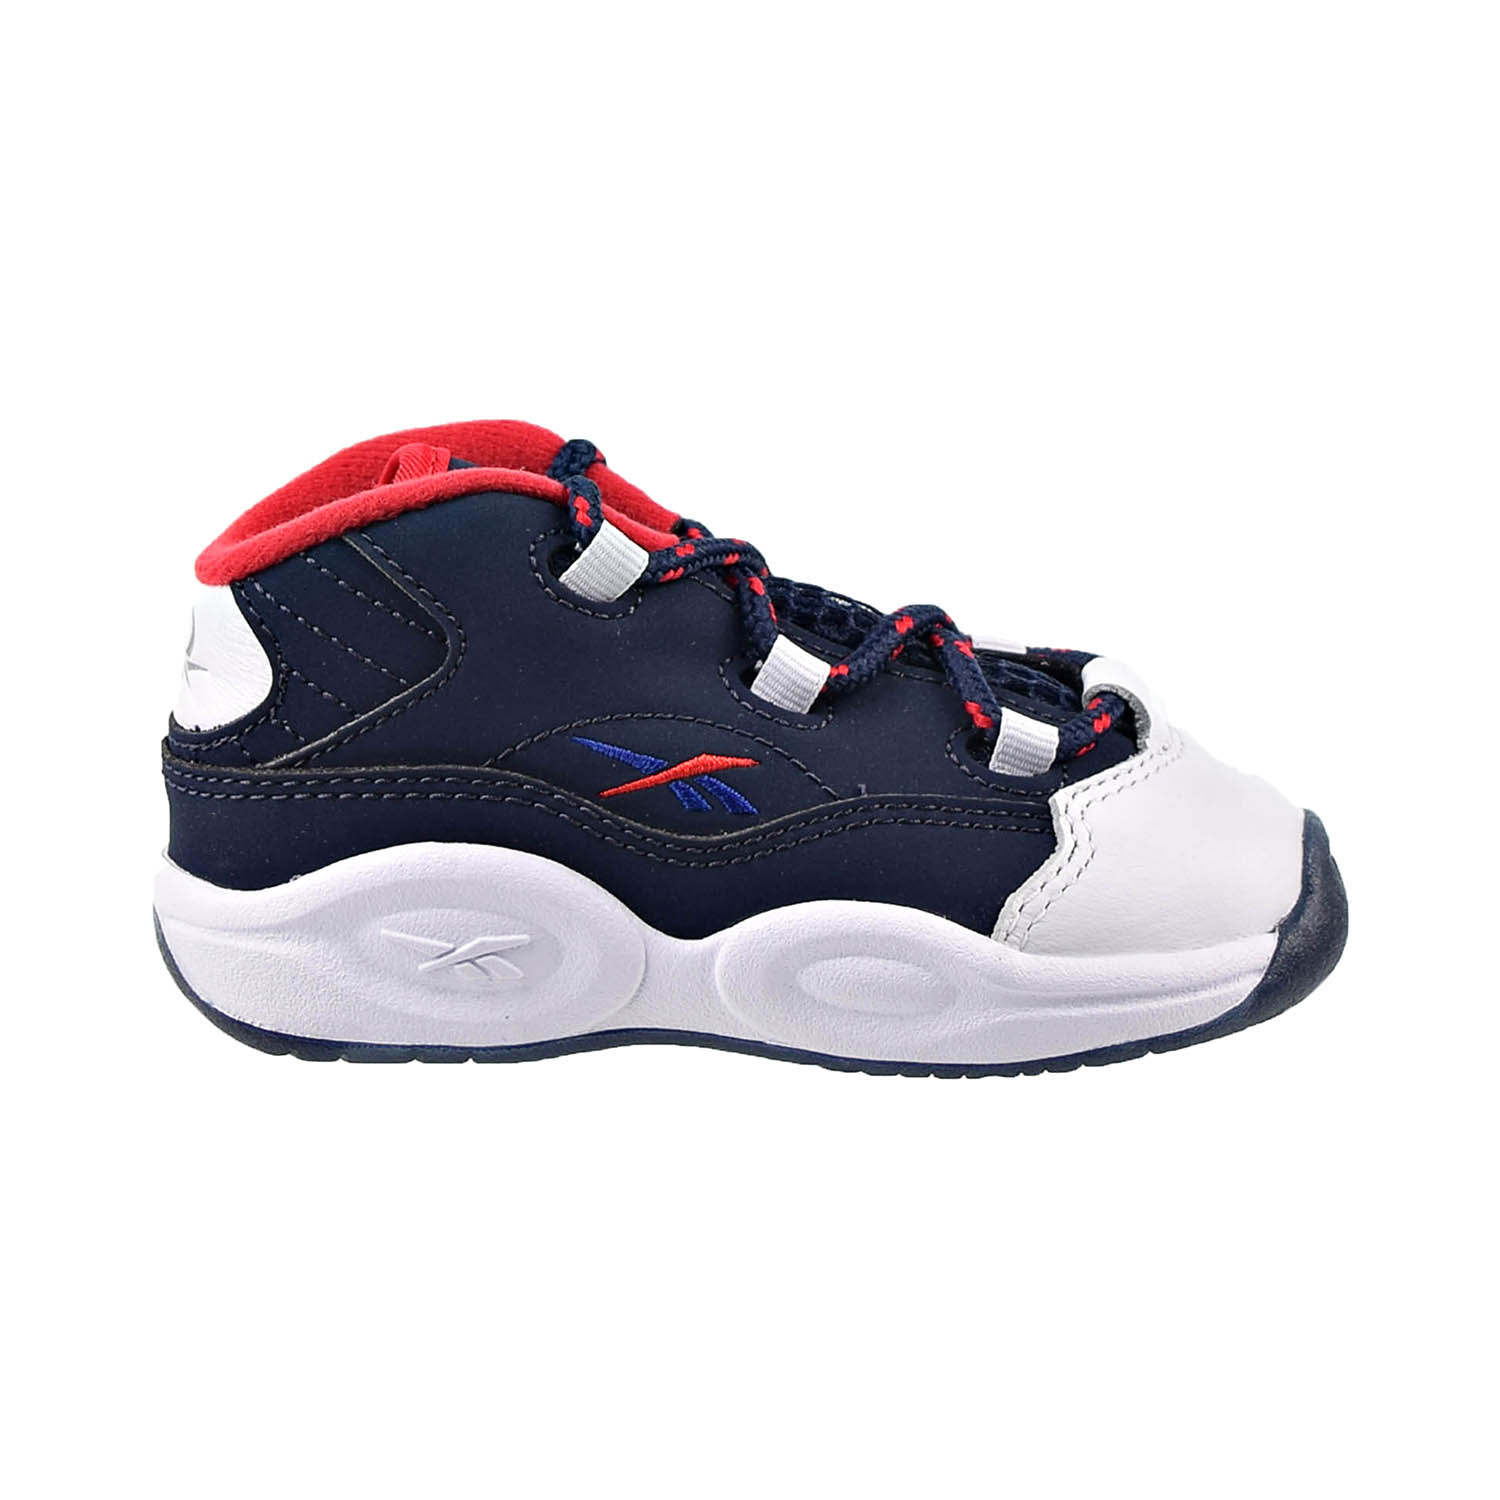 Reebok Question Mid Toddler's Shoes White-Navy-Red gx0389